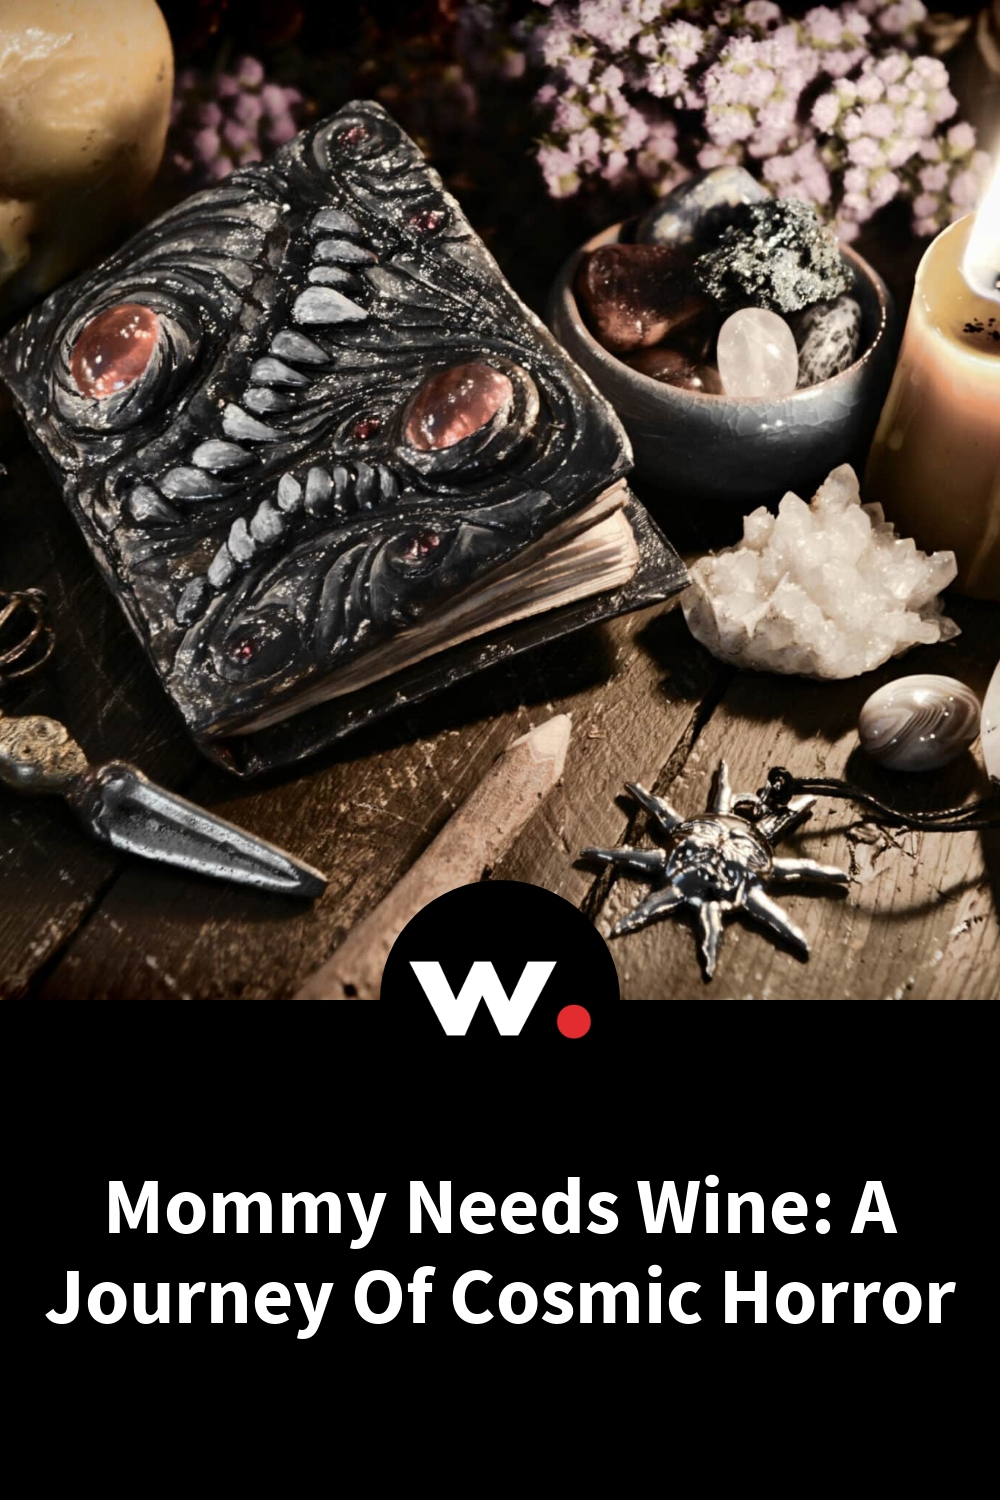 Mommy Needs Wine: A Journey Of Cosmic Horror